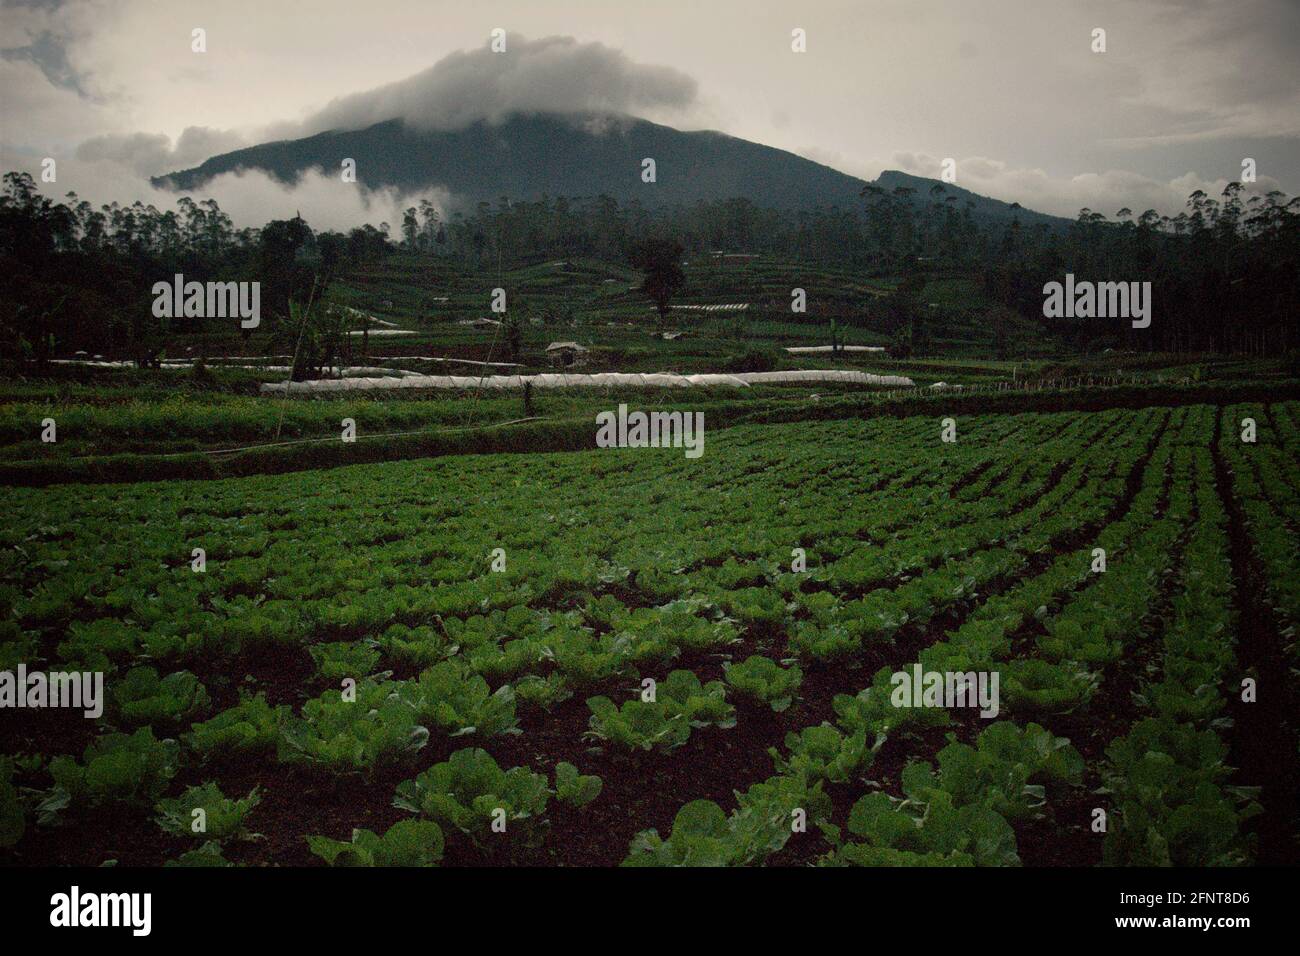 Agricultural fields outside Mount Gede Pangrango National Park, West Java, Indonesia; photographed in a background of Mount Gede volcano, in 2013 during a tree adoption program--a  part of reforestation project in the protected park. Stock Photo